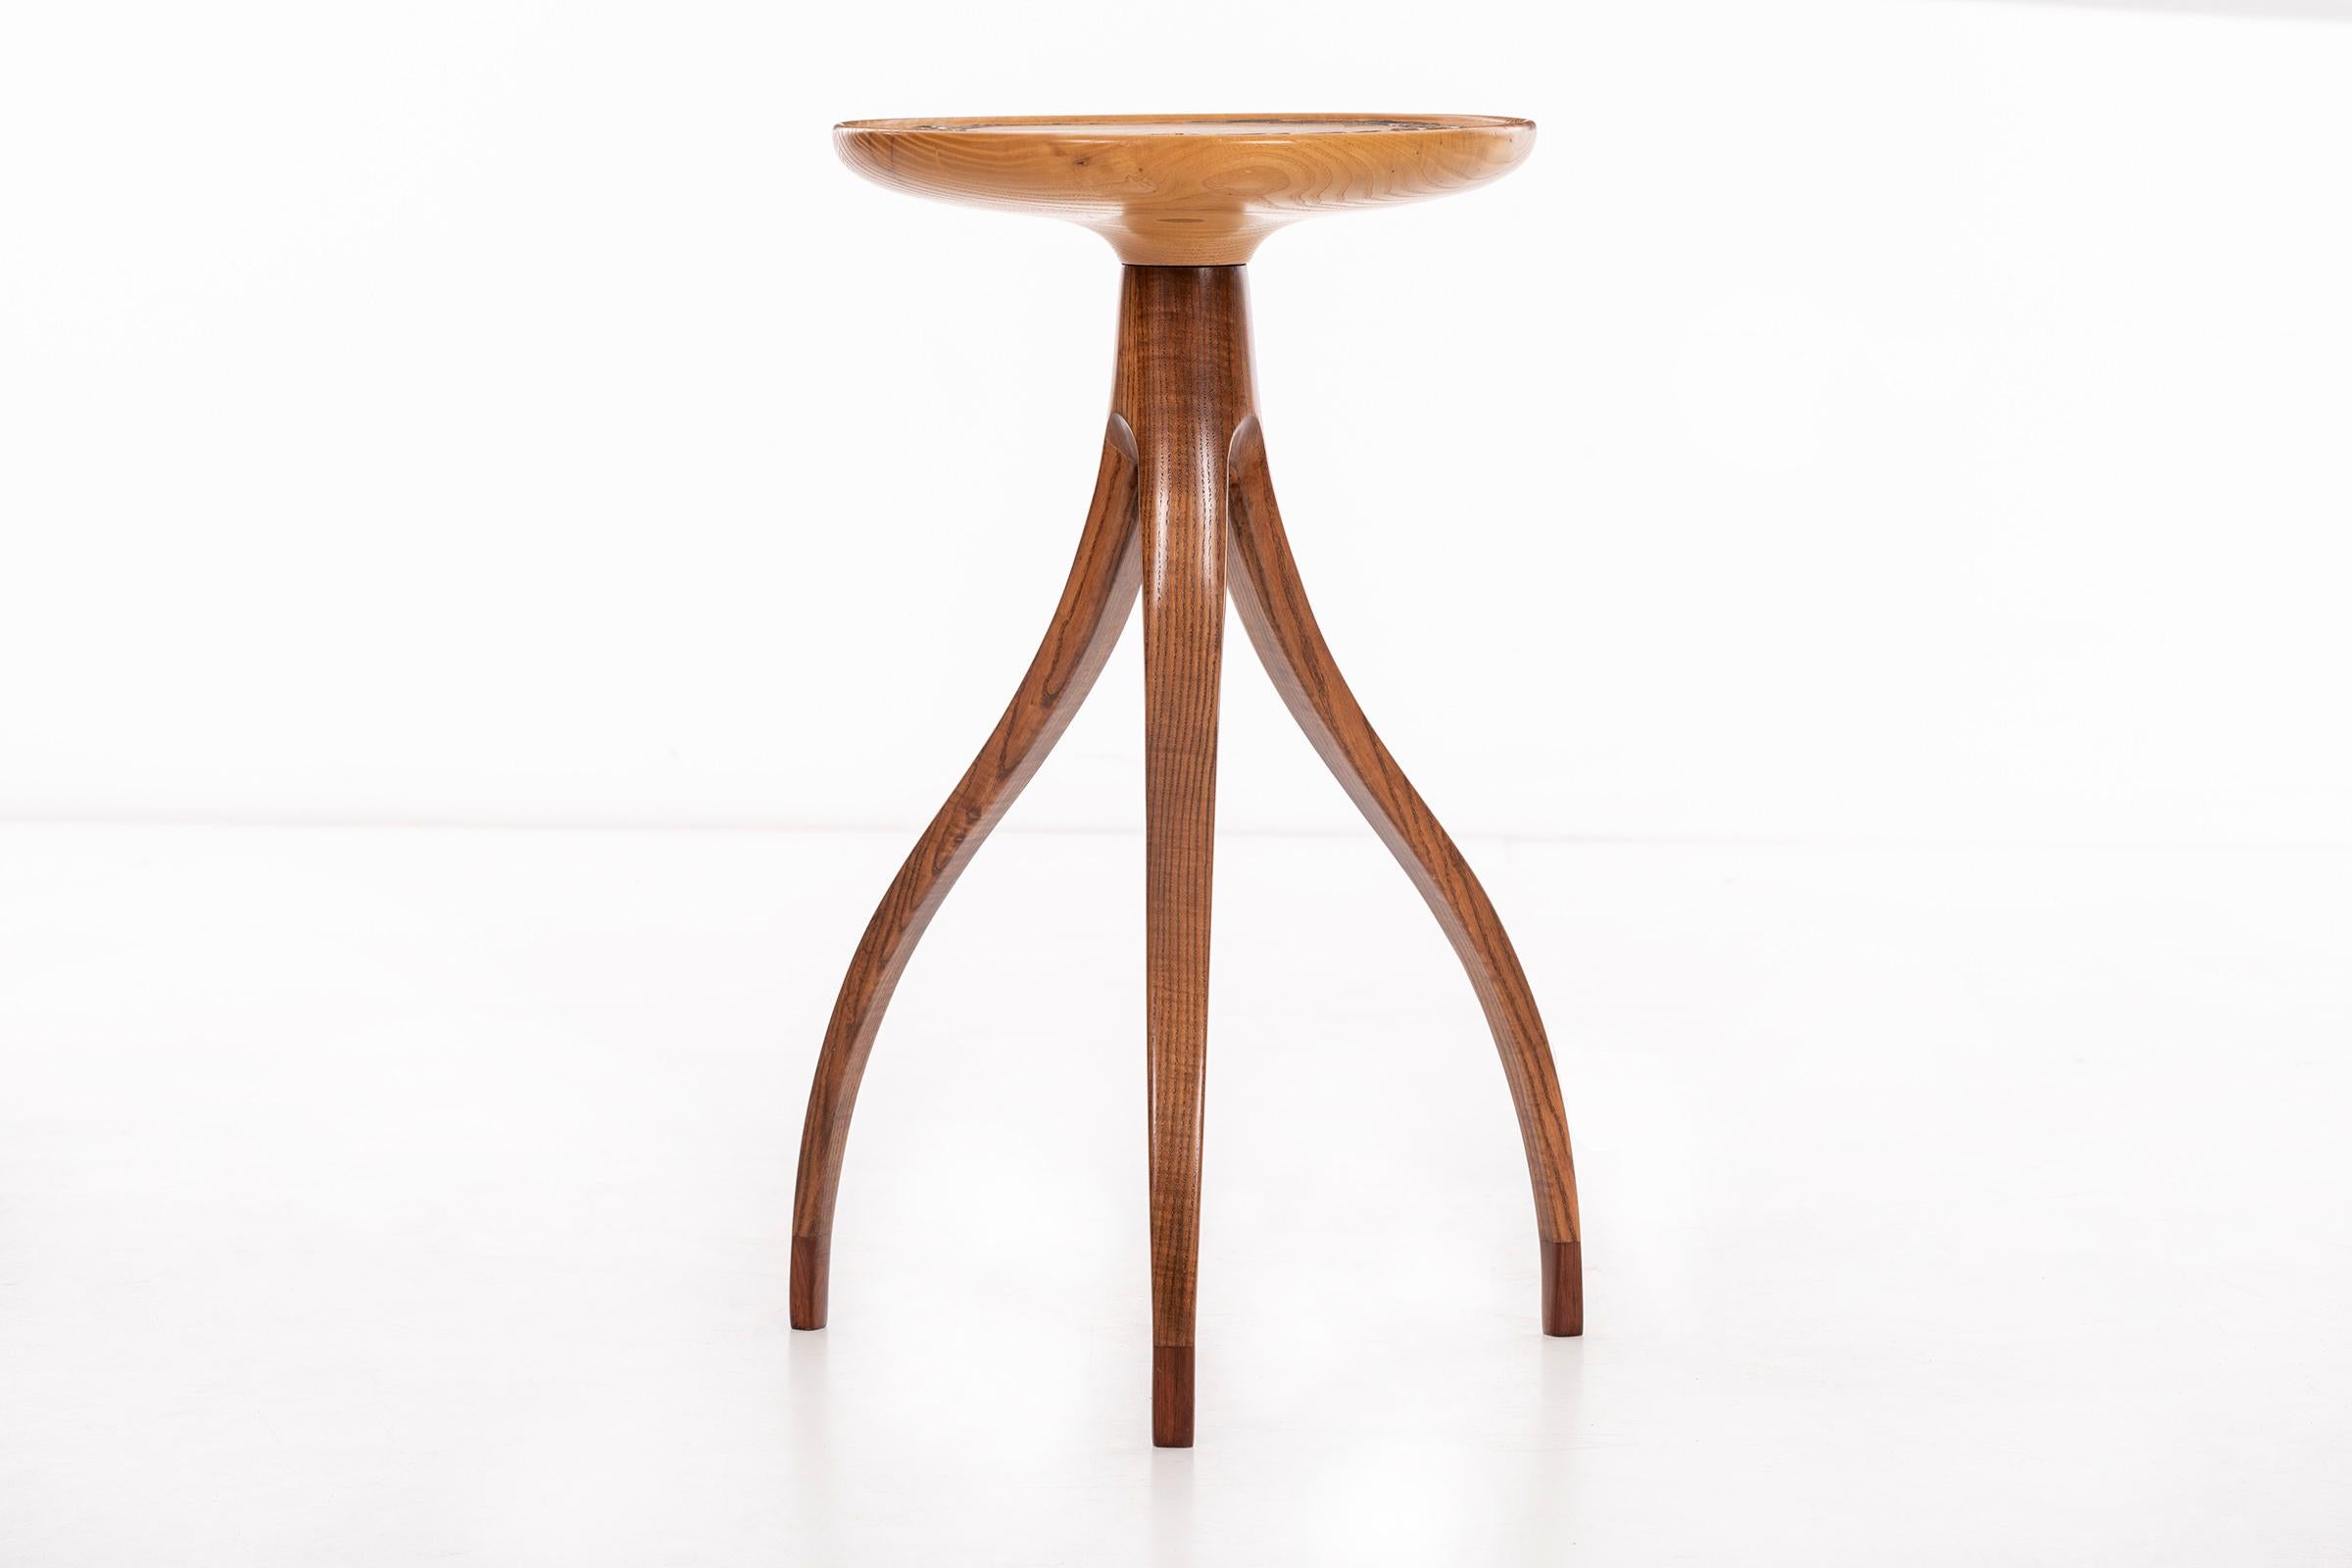 Slender scale high tripod table, solid carved bleached walnut lip edge top with ceramic design detail inset.
Feet have darker tone wood accent.